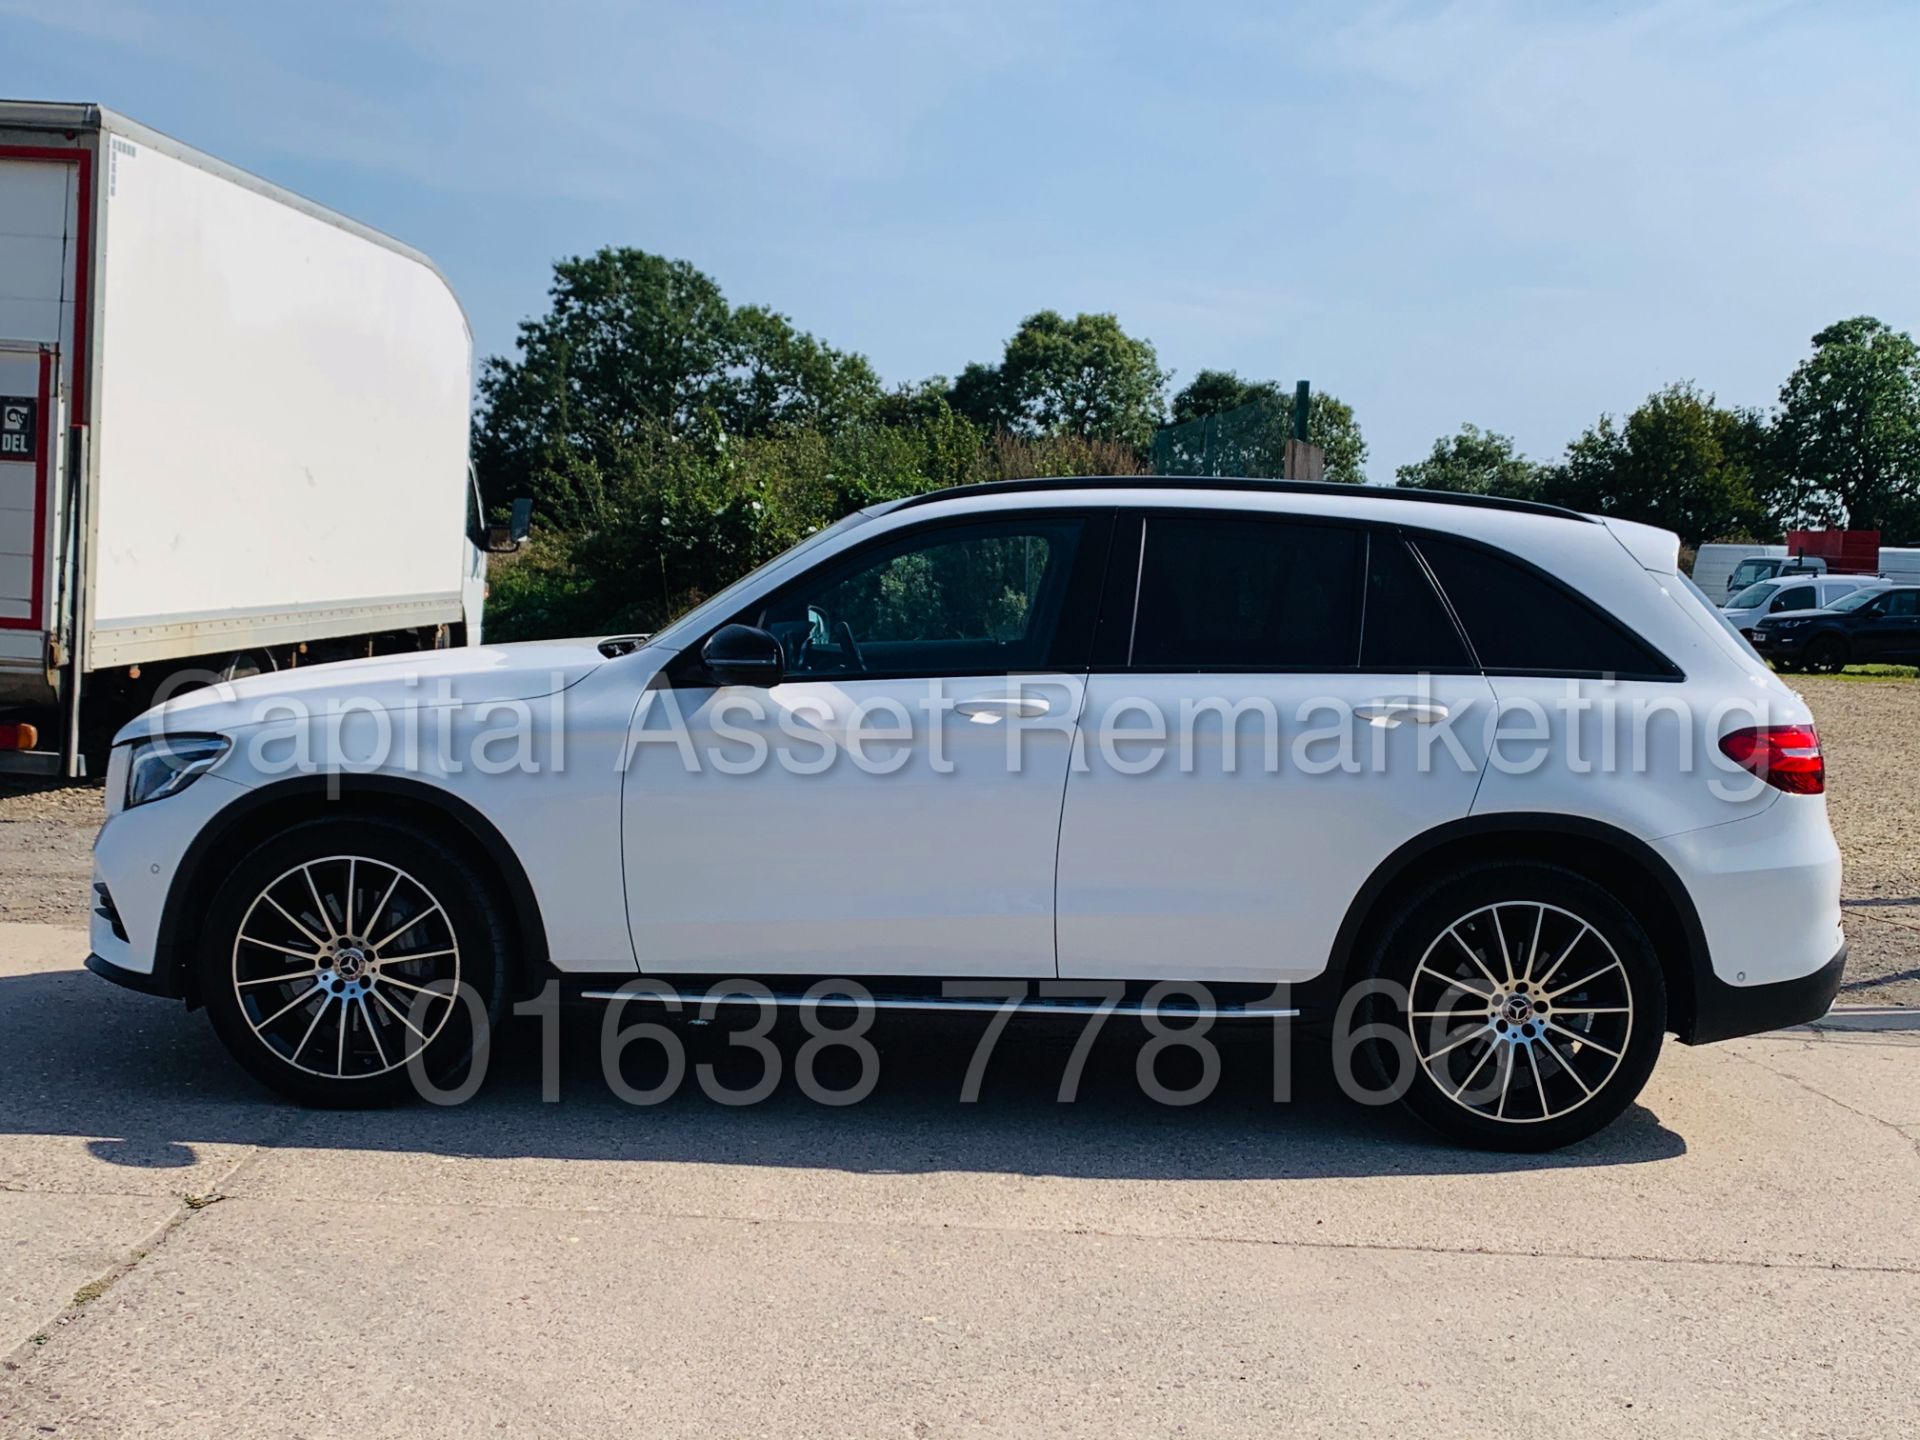 (On Sale) MERCEDES-BENZ GLC 250 *AMG - NIGHT EDITION* SUV (2019) '9G TRONIC - 4-MATIC' *HUGE SPEC* - Image 8 of 53